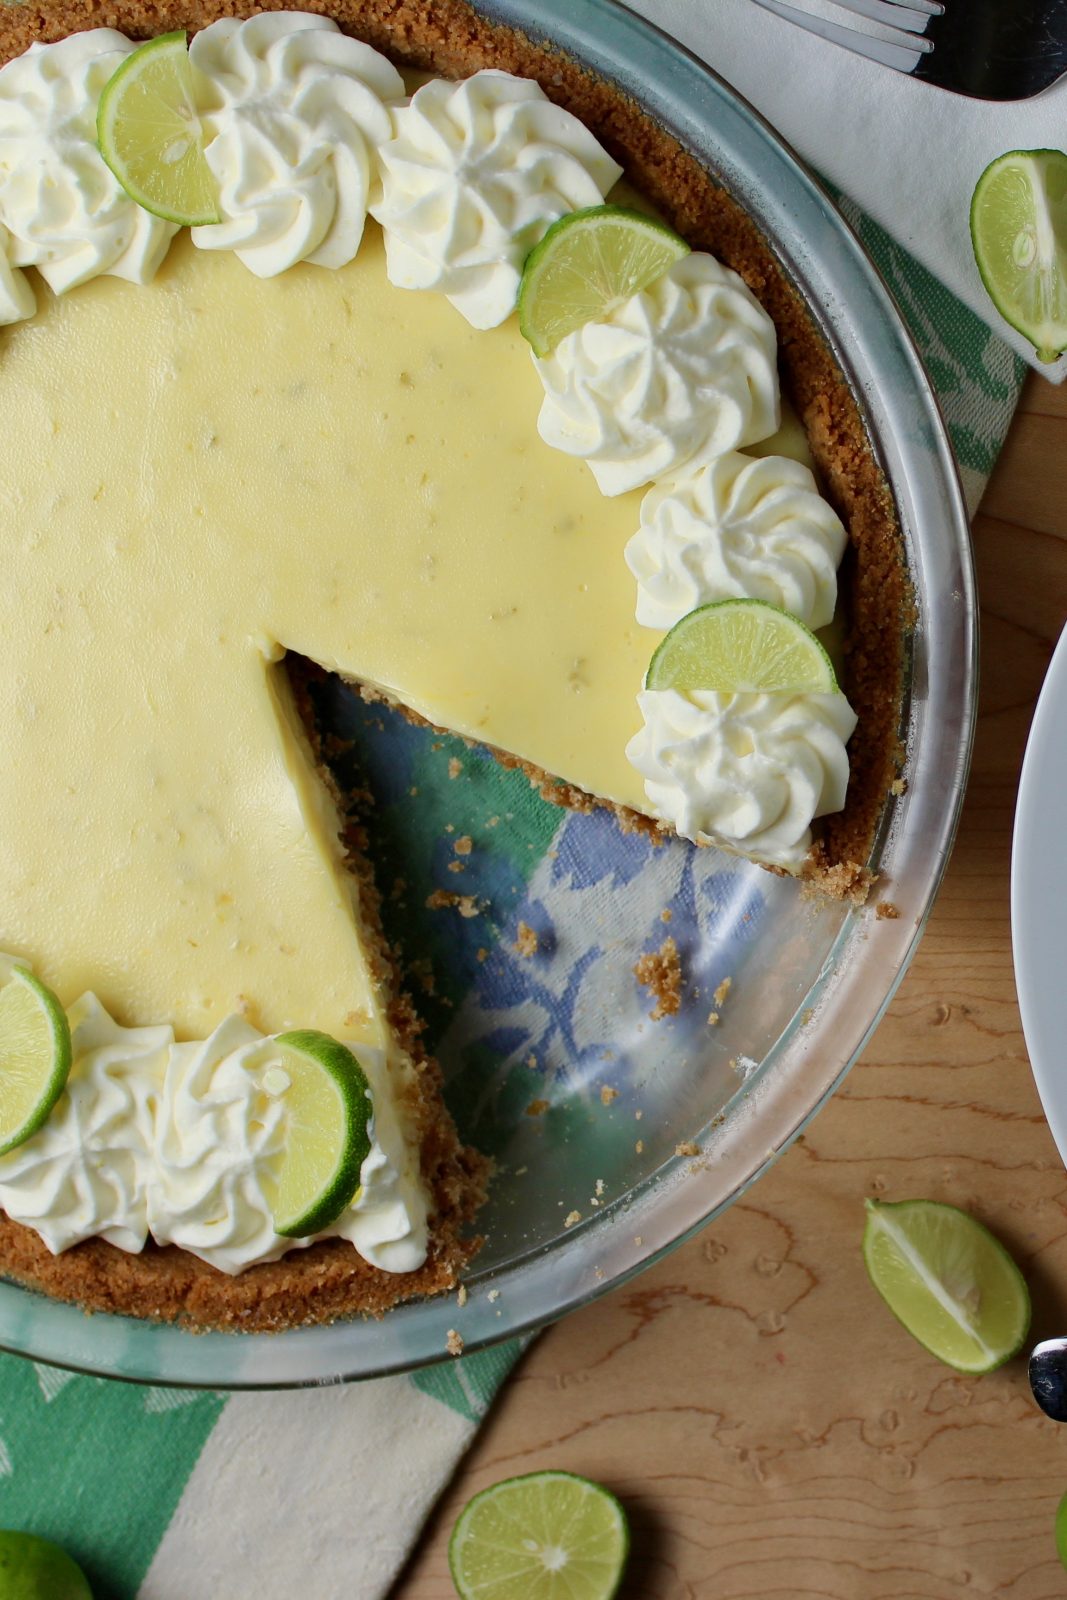 Key Lime Pie with slice cut. garnished with whipped cream rosettes and key lime slices